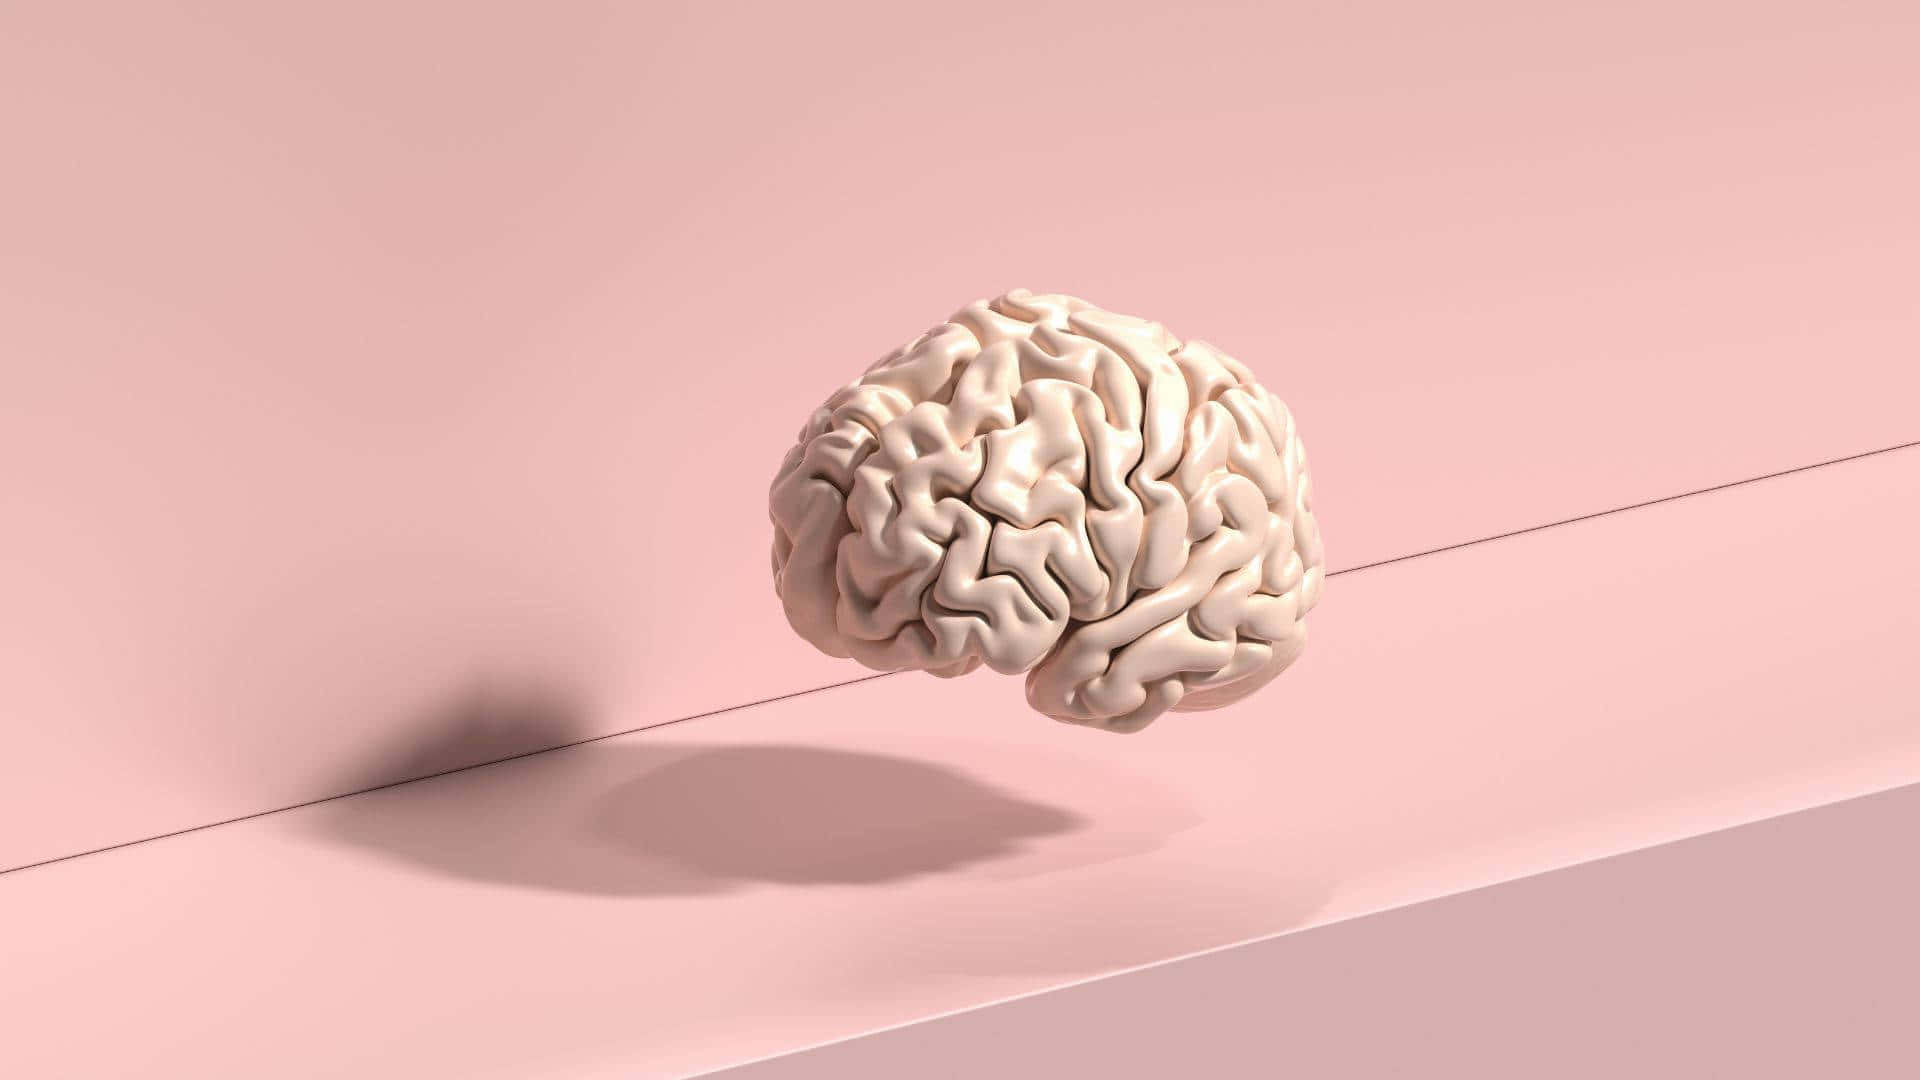 A Brain On A Pink Background